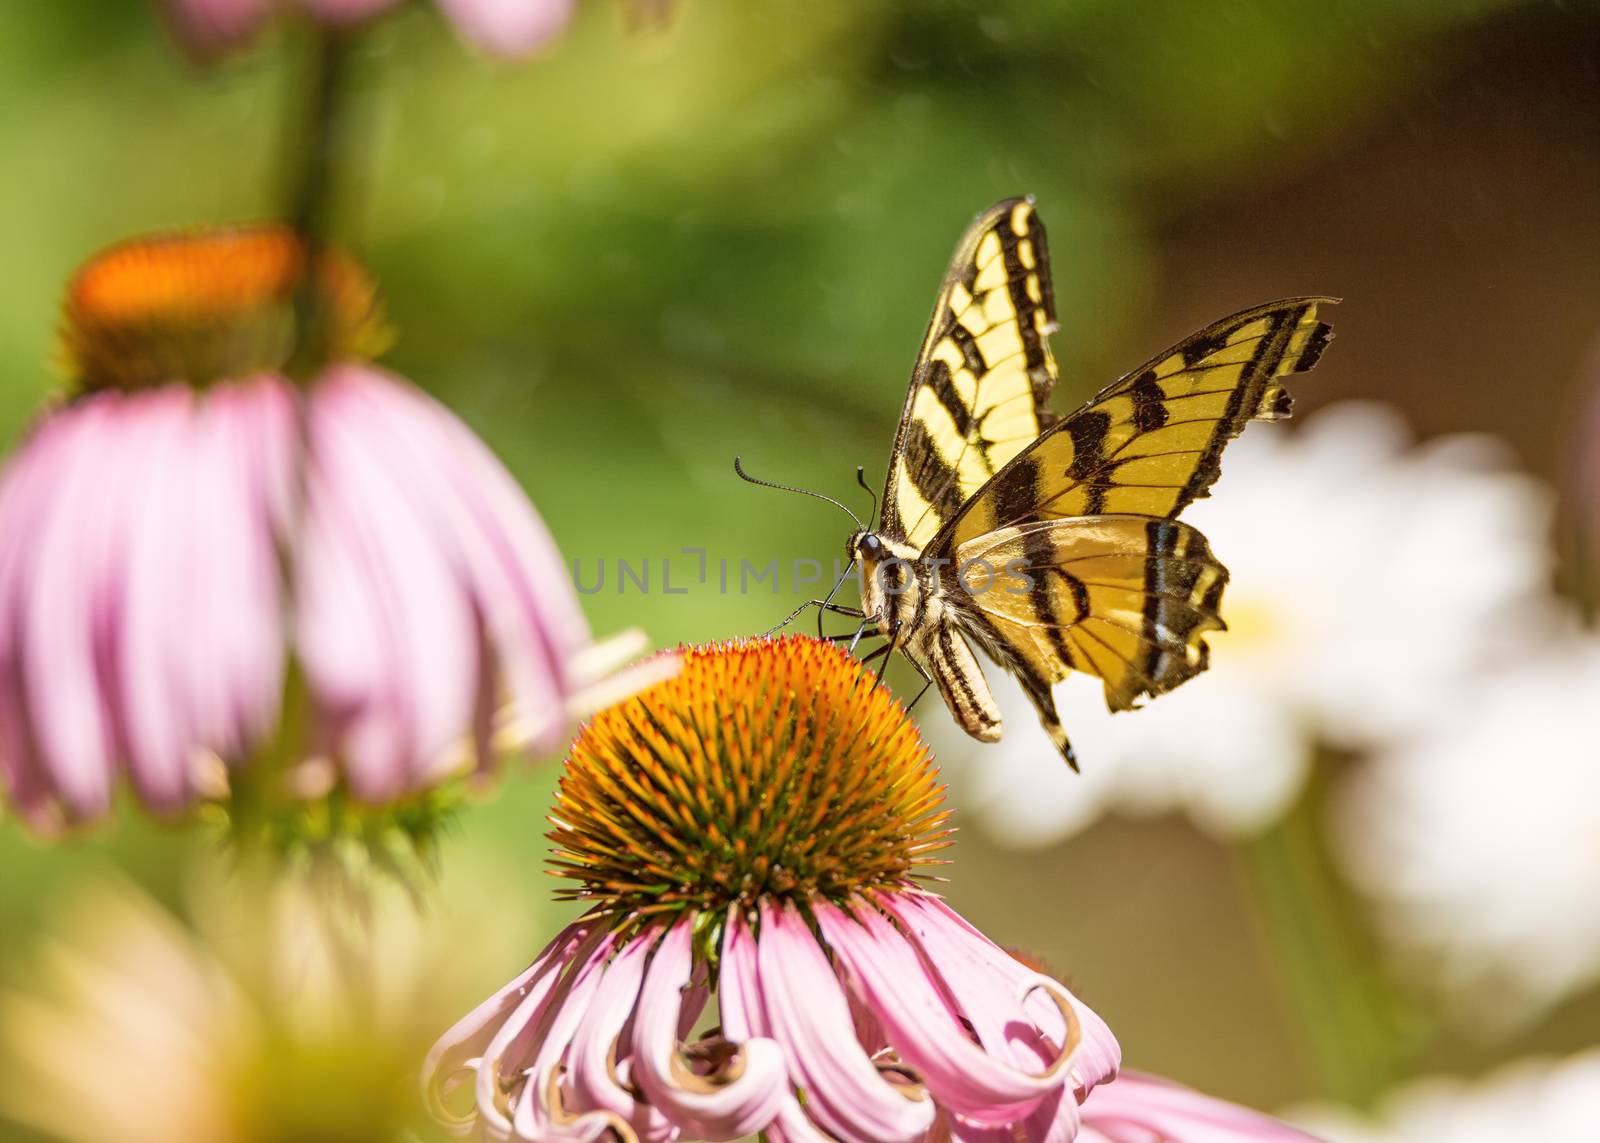 Yellow and Black Monarch Butterfly on a Flower by backyard_photography